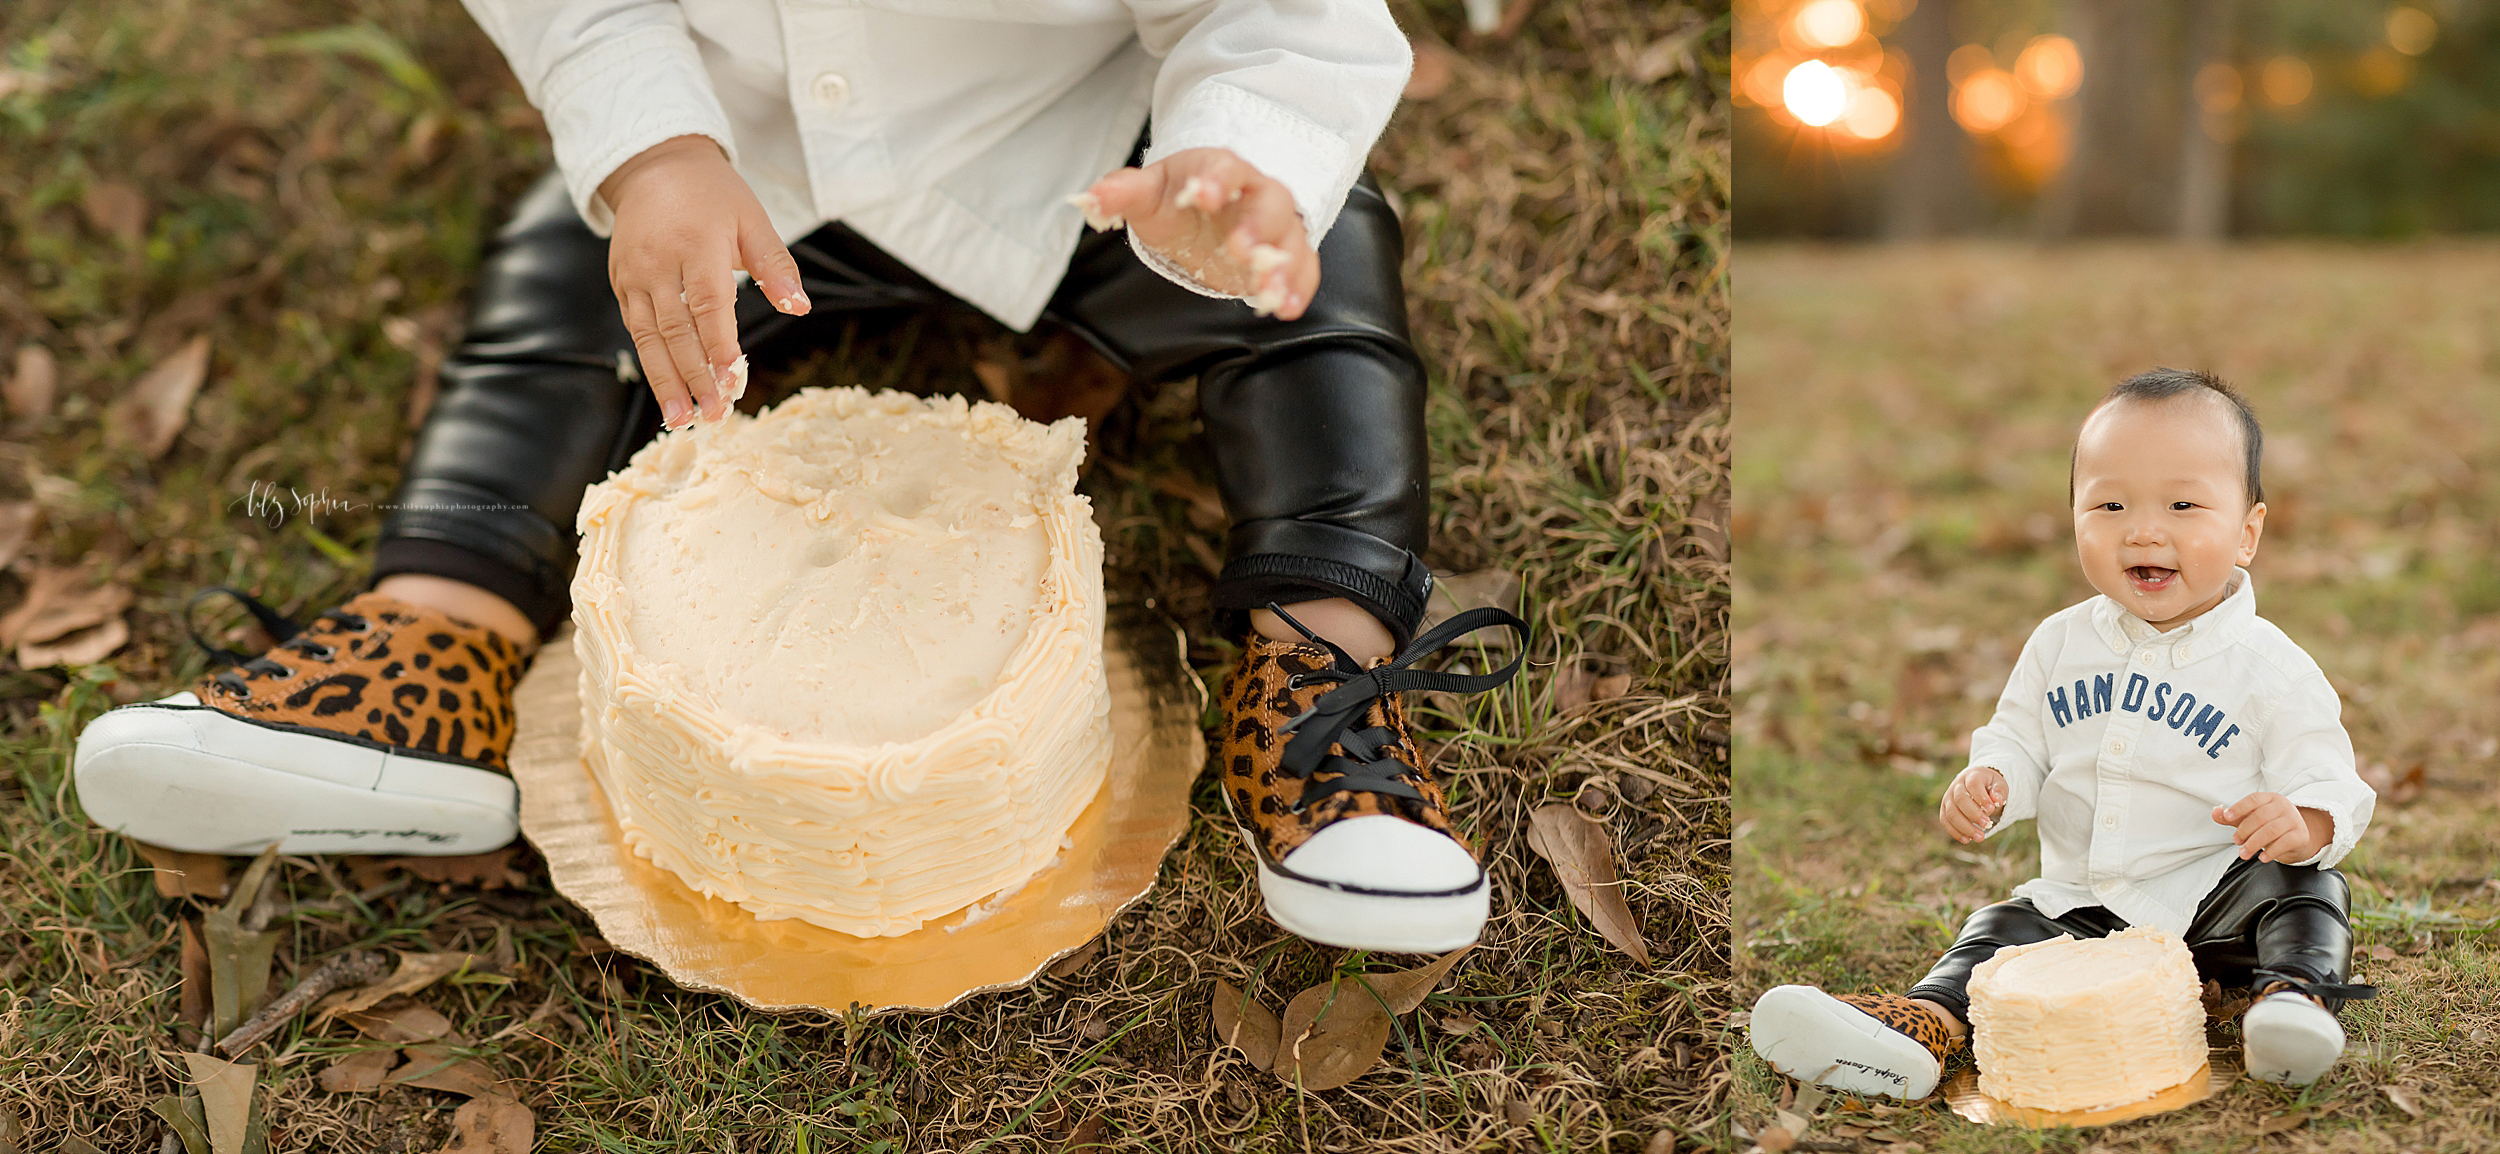 atlanta-buckhead-brookhaven-decatur-lily-sophia-photography--photographer-portraits-grant-park-intown-park-sunset-first-birthday-cake-smash-one-year-old-outdoors-cool-asian-american-family_0097.jpg